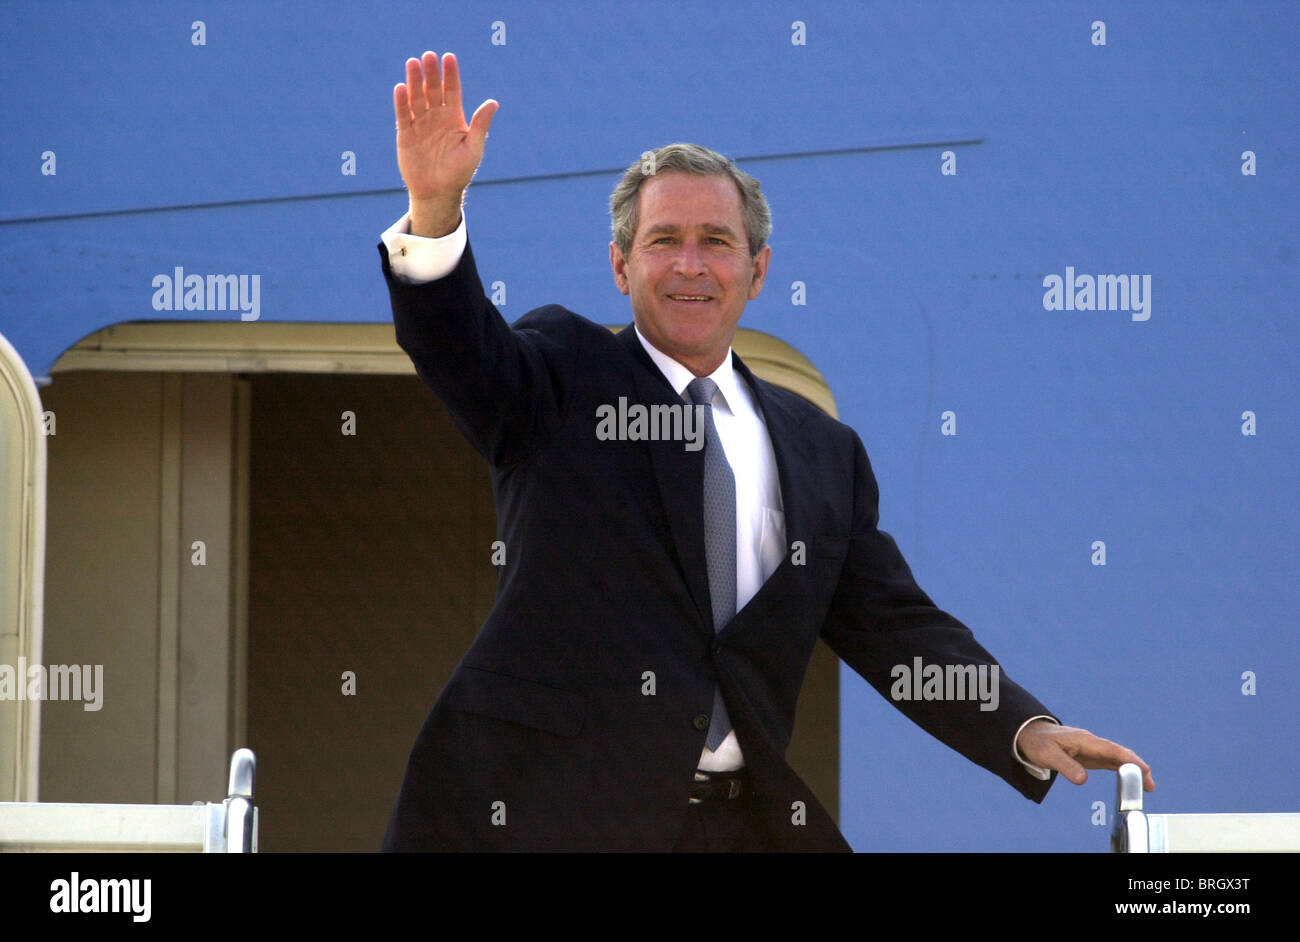 U.S. President George W. Bush arrives at Andres Airforce base in Maryland. Stock Photo